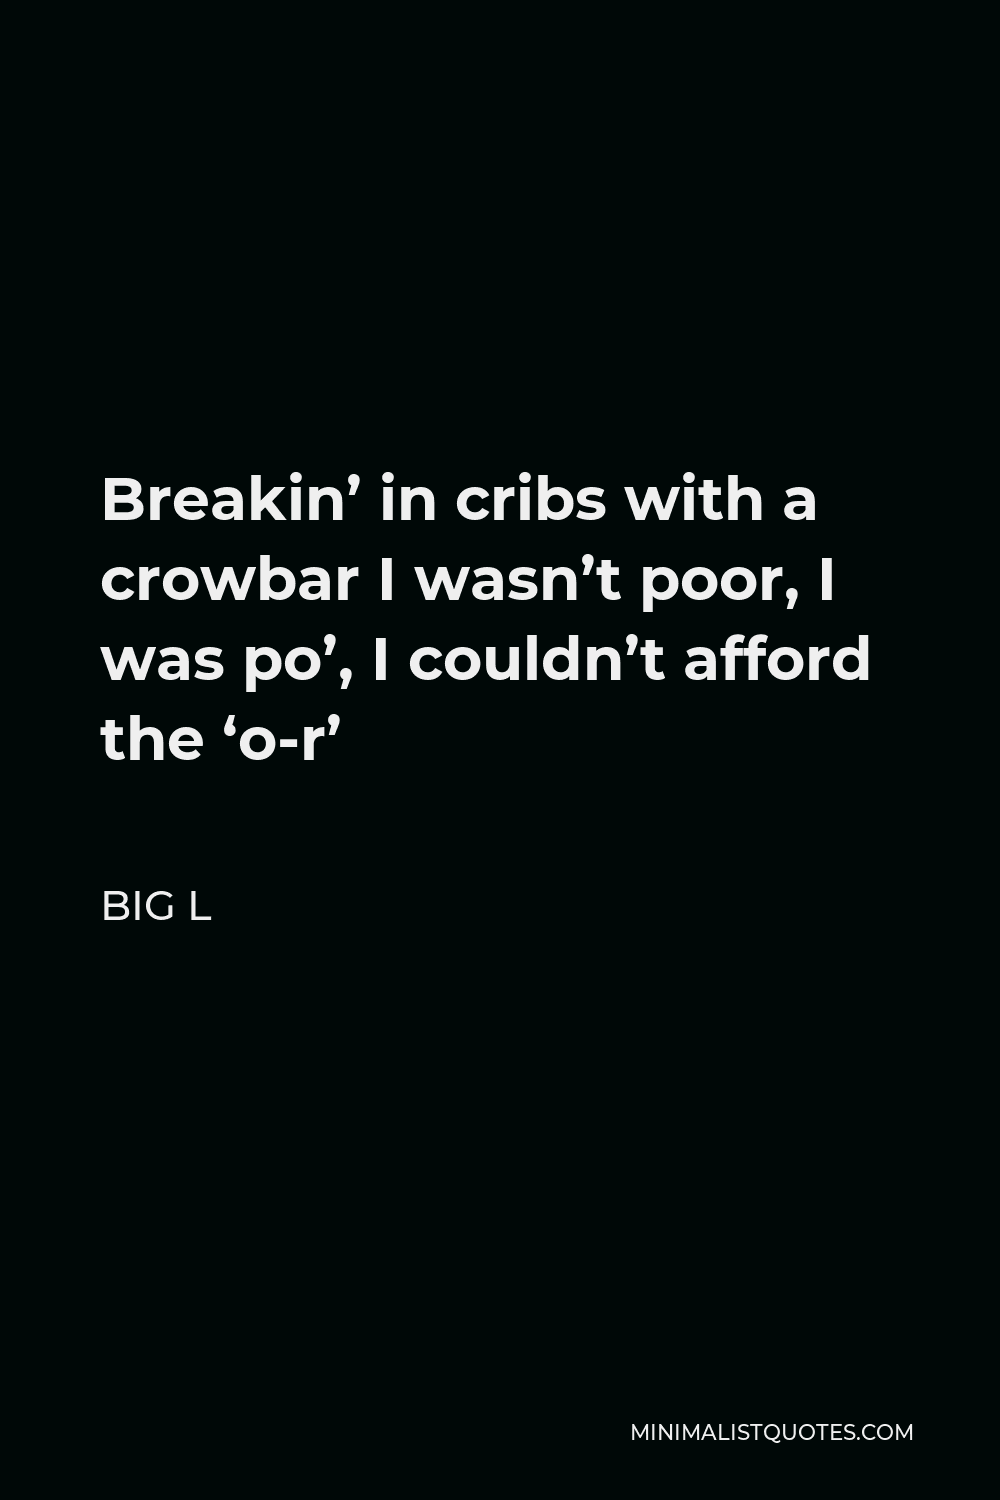 Big L Quote - Breakin’ in cribs with a crowbar I wasn’t poor, I was po’, I couldn’t afford the ‘o-r’